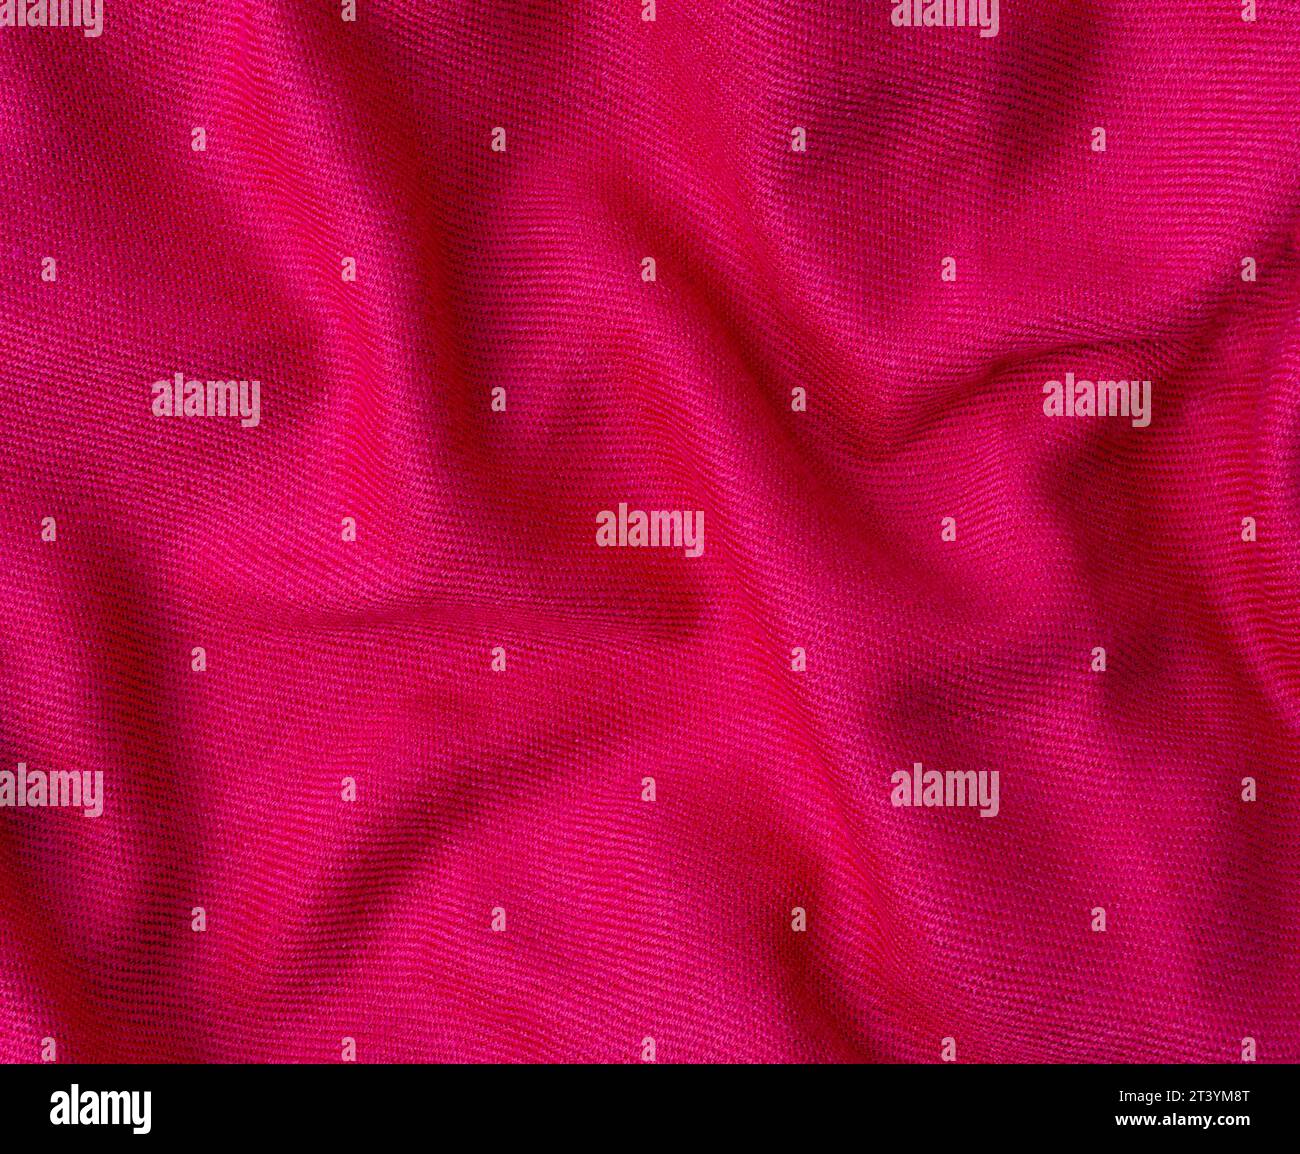 wrinkled pink fabric texture background close-up Stock Photo